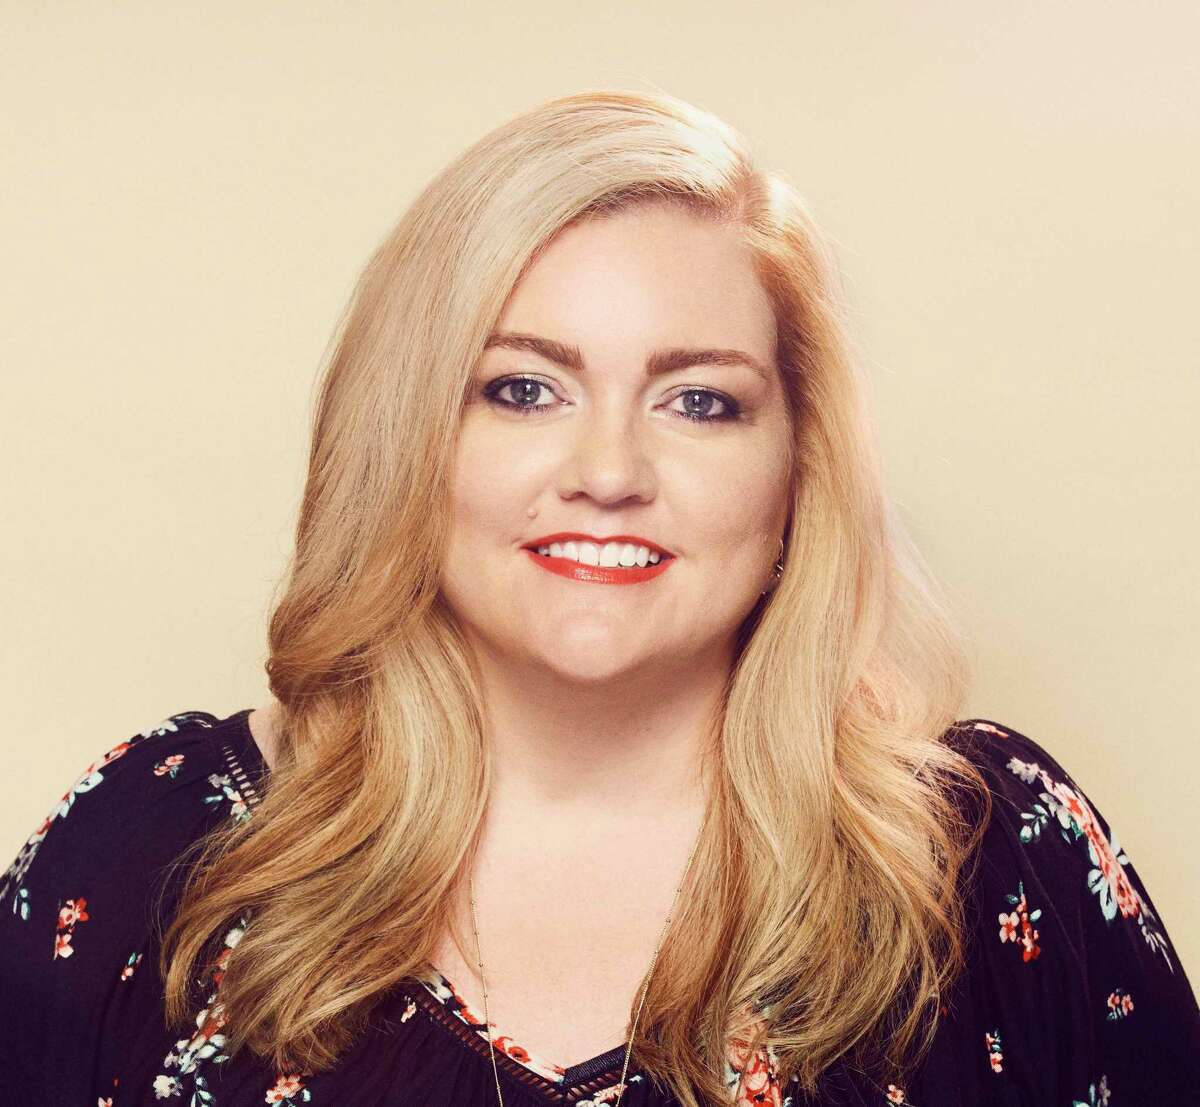 Texas novelist Colleen Hoover to speak on new book, &#039;Regretting You&#039;